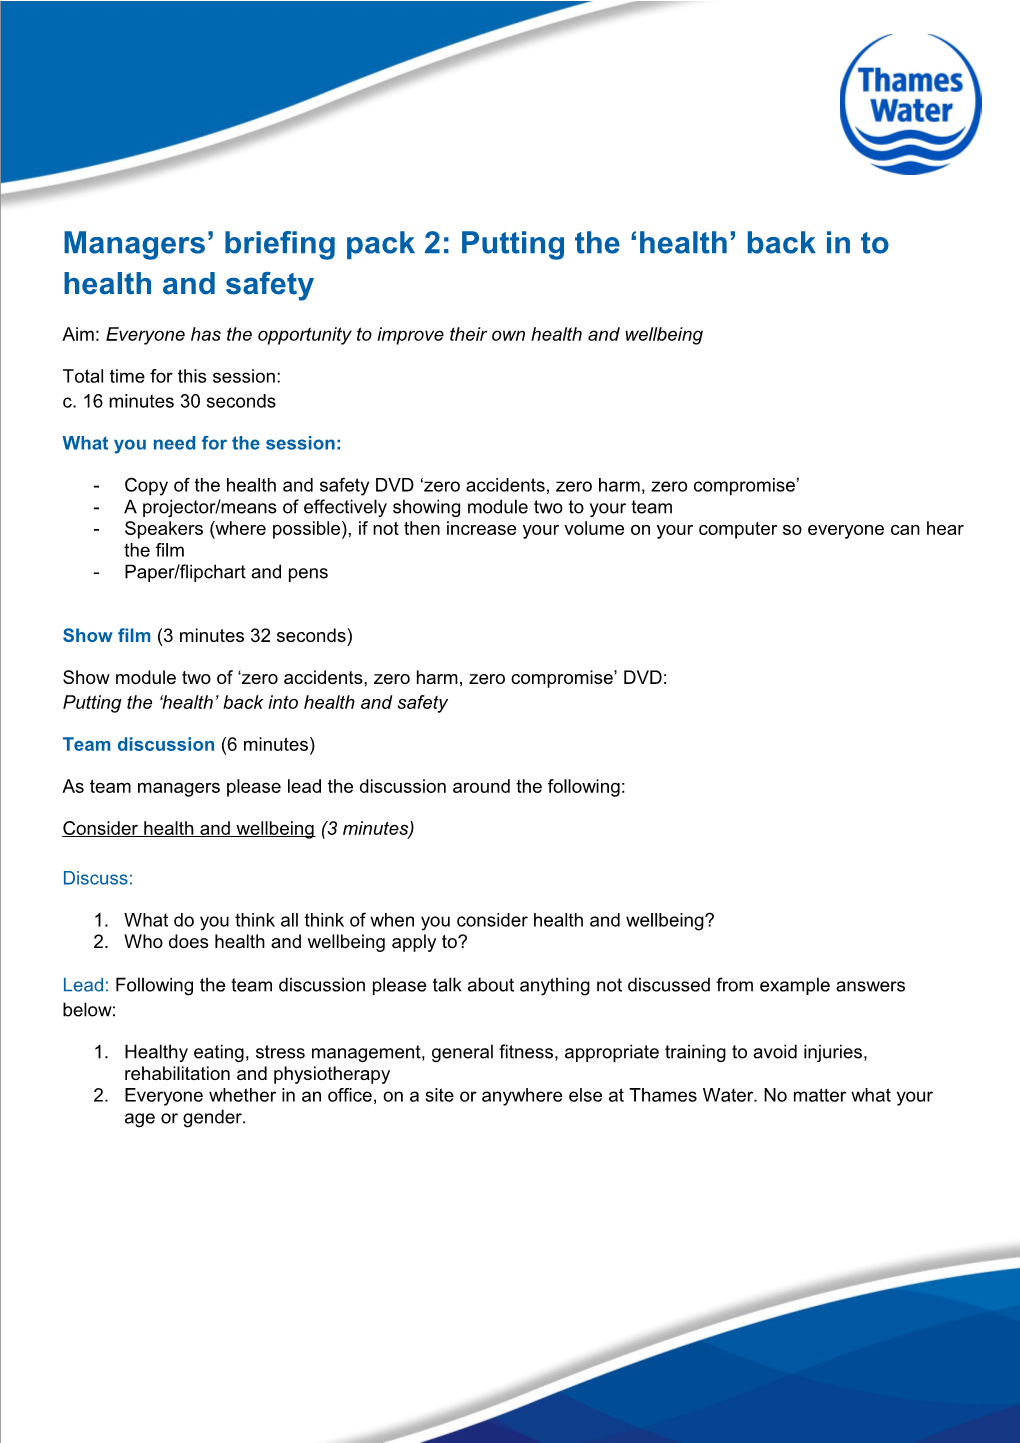 Managers Briefing Pack 2: Putting the Health Back in to Health and Safety